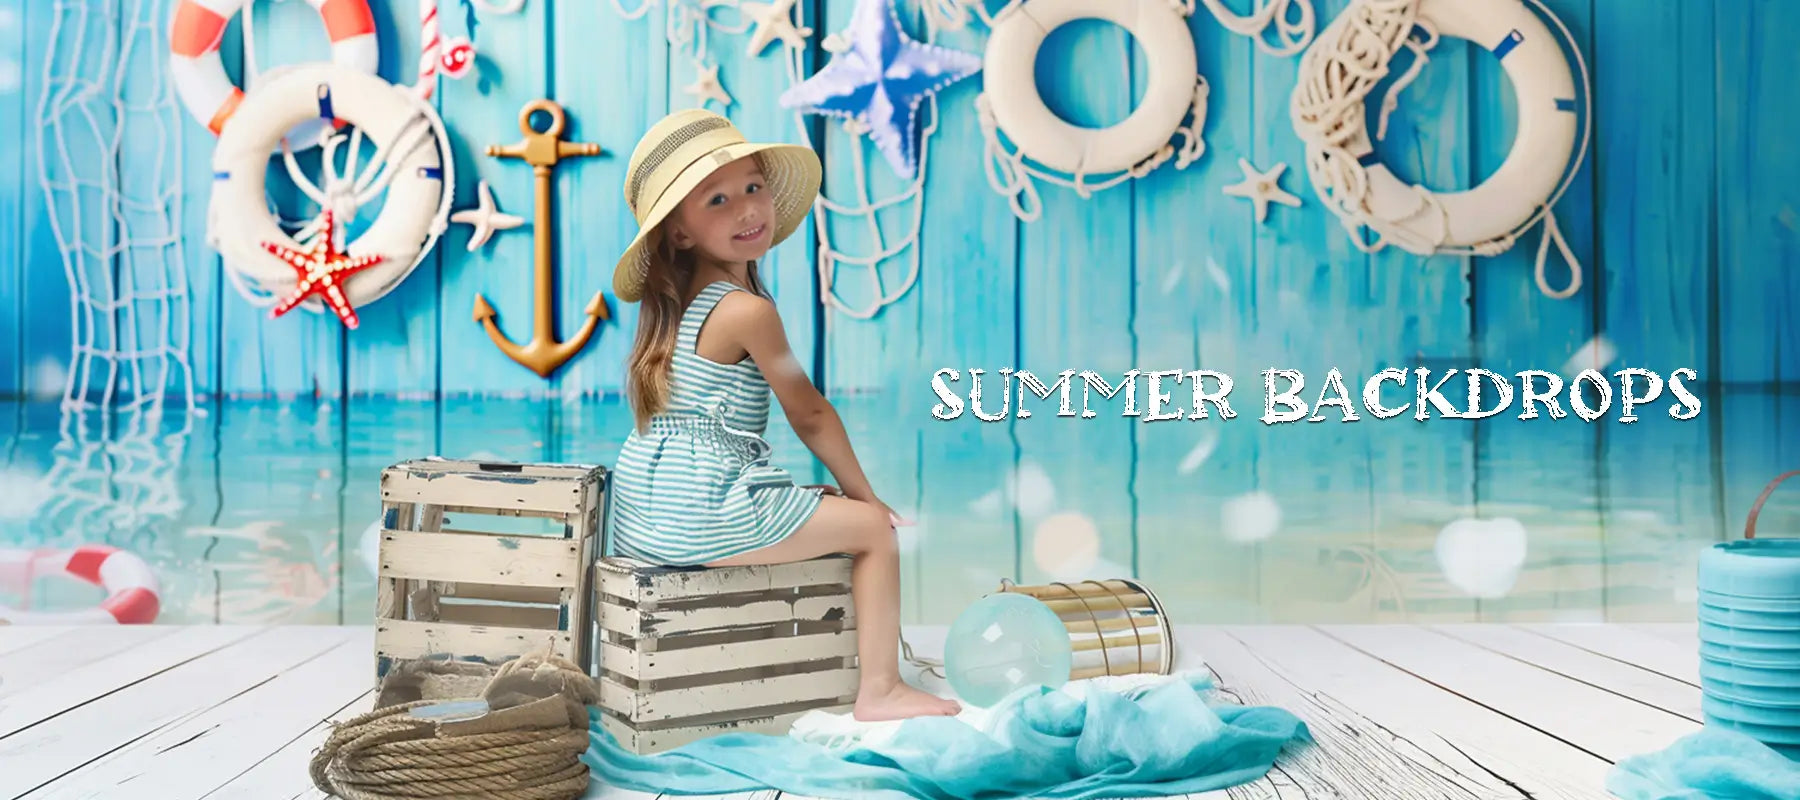 Summer Beach Backdrop for Party Photography